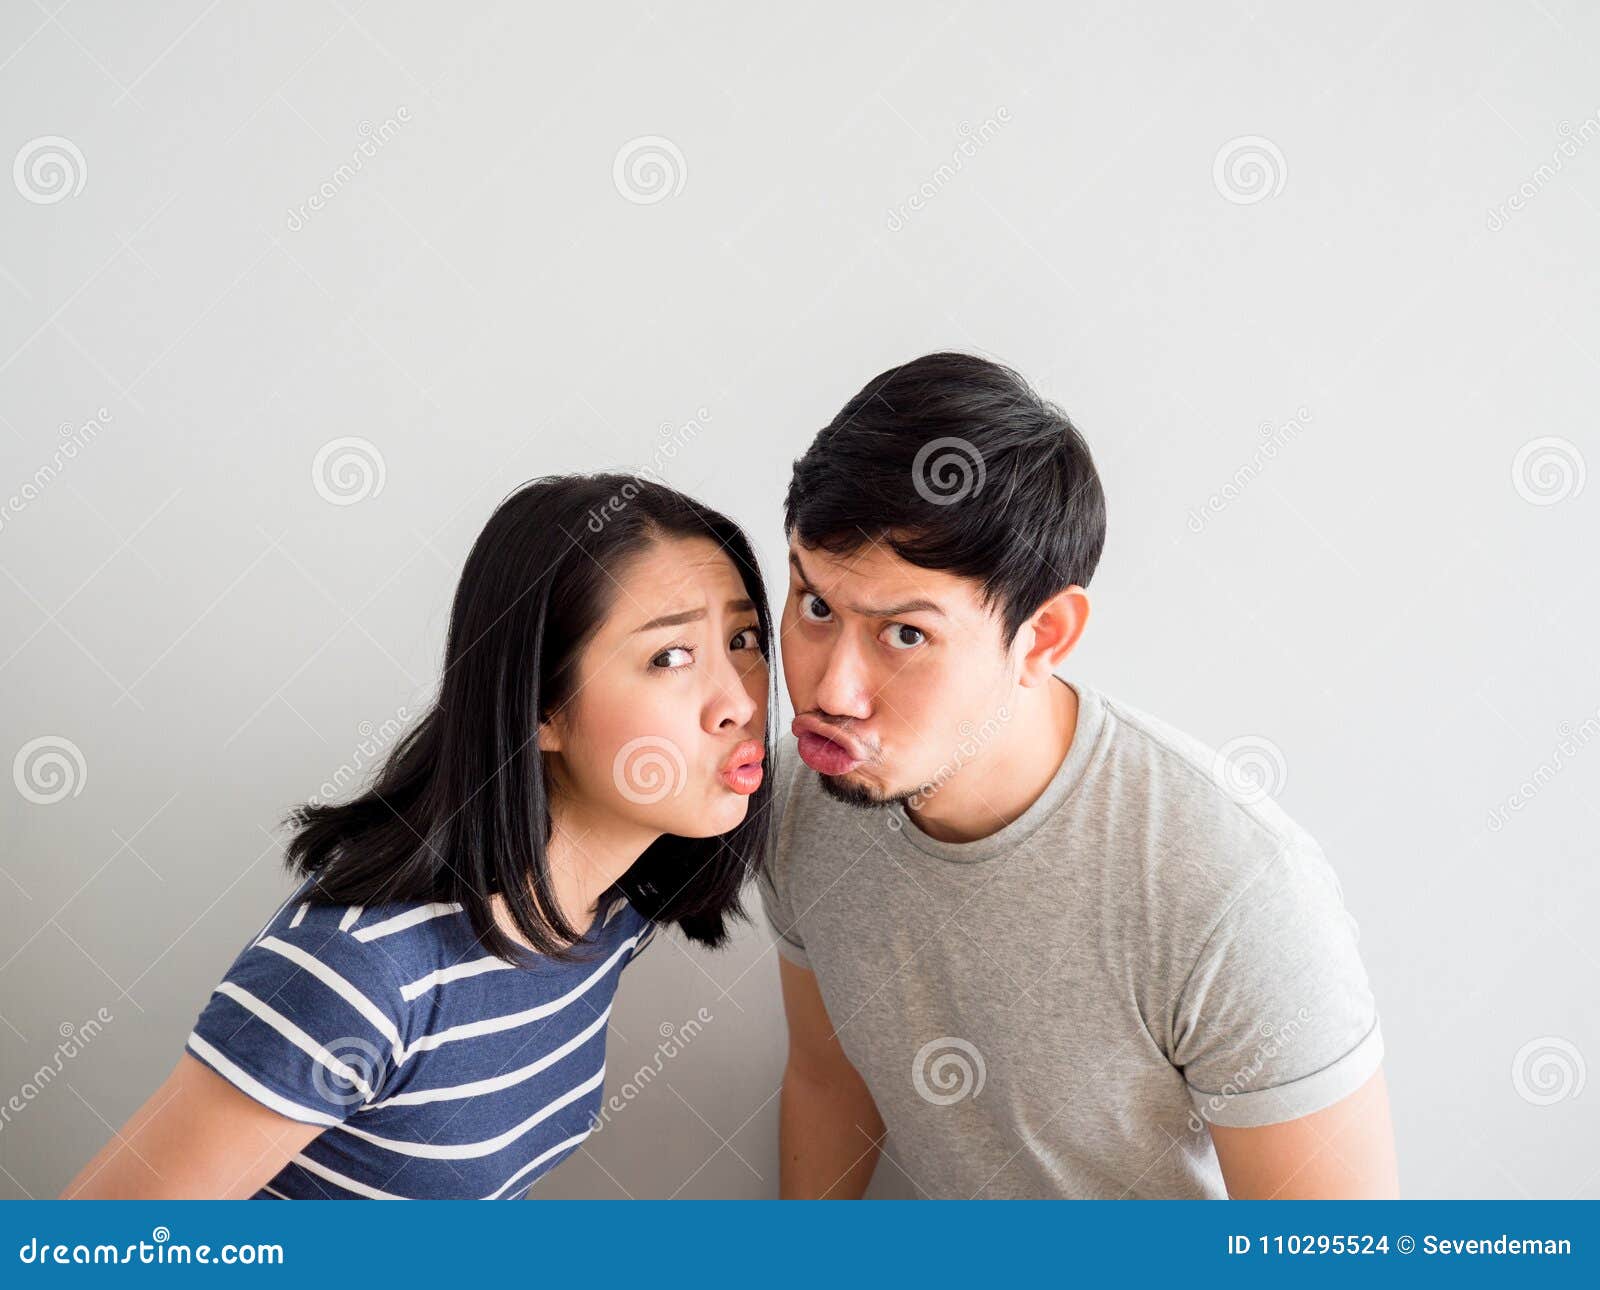 Funny Lovely Couple Trying To Kiss Each Other Concept Of Comedy